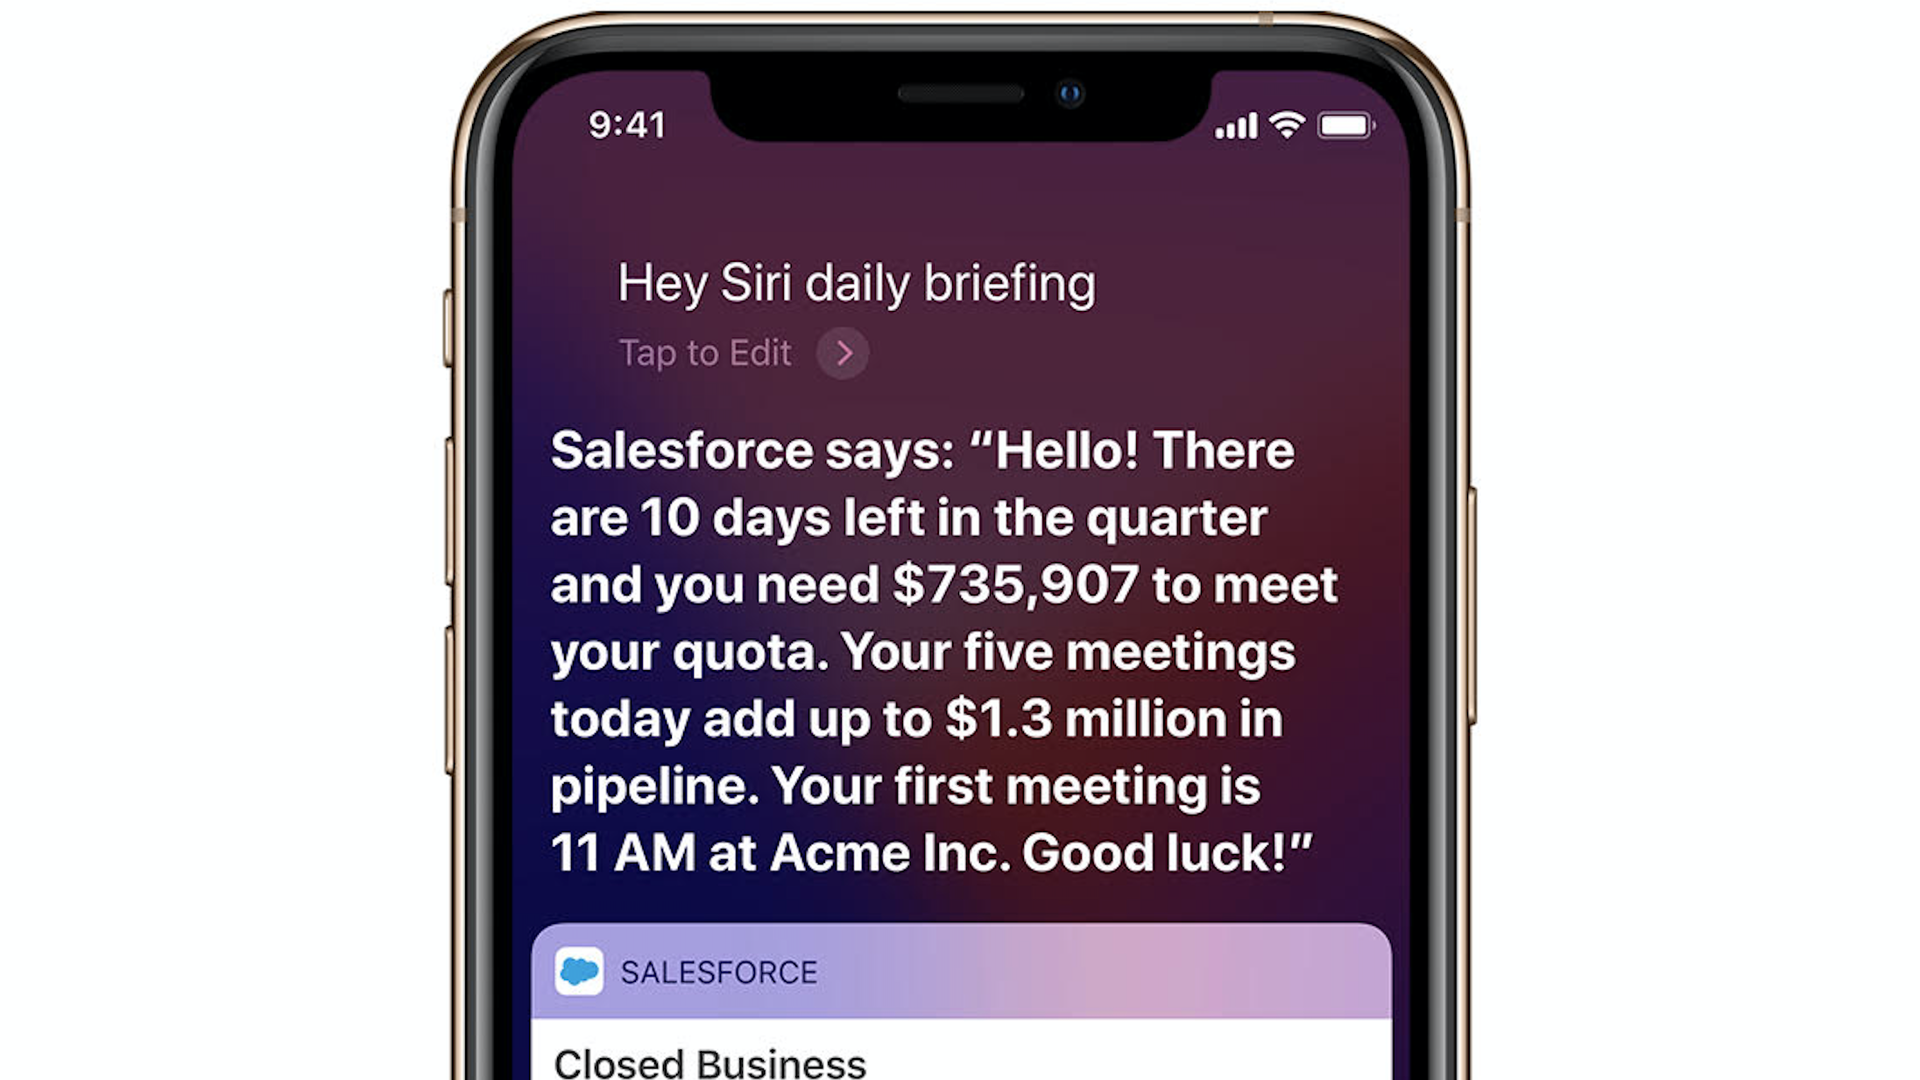 Salesforce data showing up inside of Apple's Siri assistant